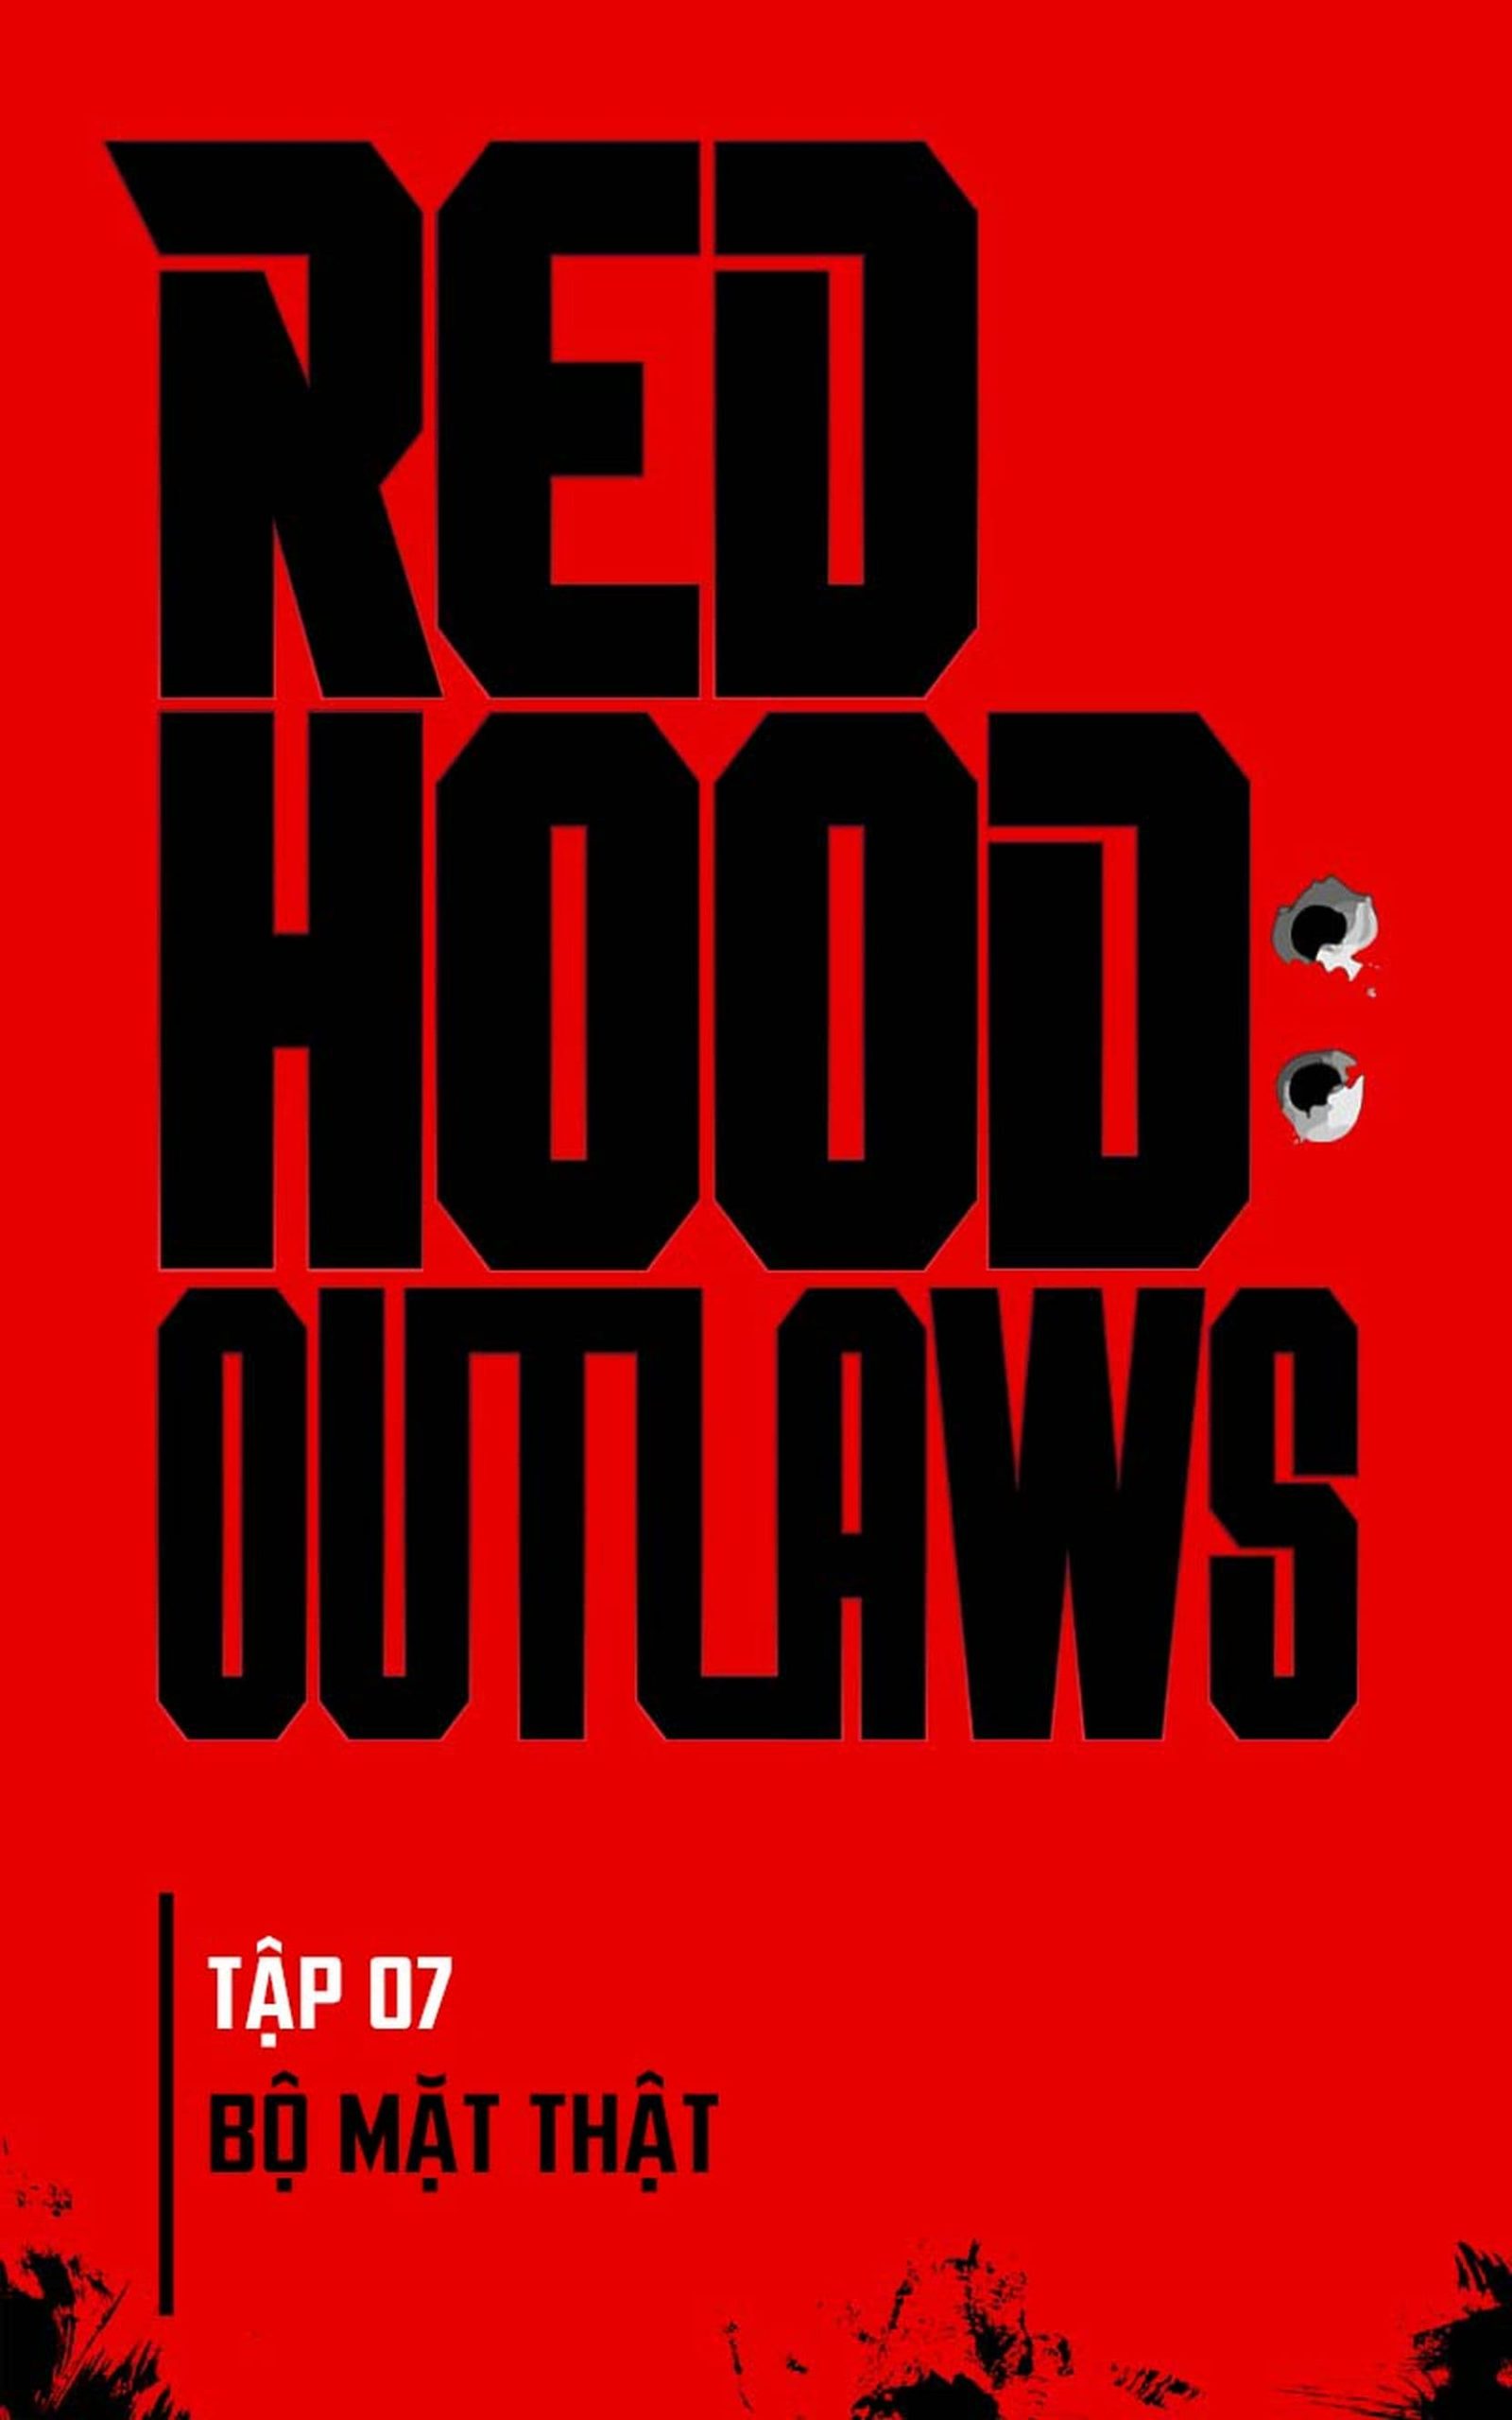 https://langgeek.net/wp-content/webpc-passthru.php?src=https://langgeek.net/wp-content/uploads/2022/12/Red-Hood-Outlaws-007-The-Real-You-003-scaled.jpg&nocache=1